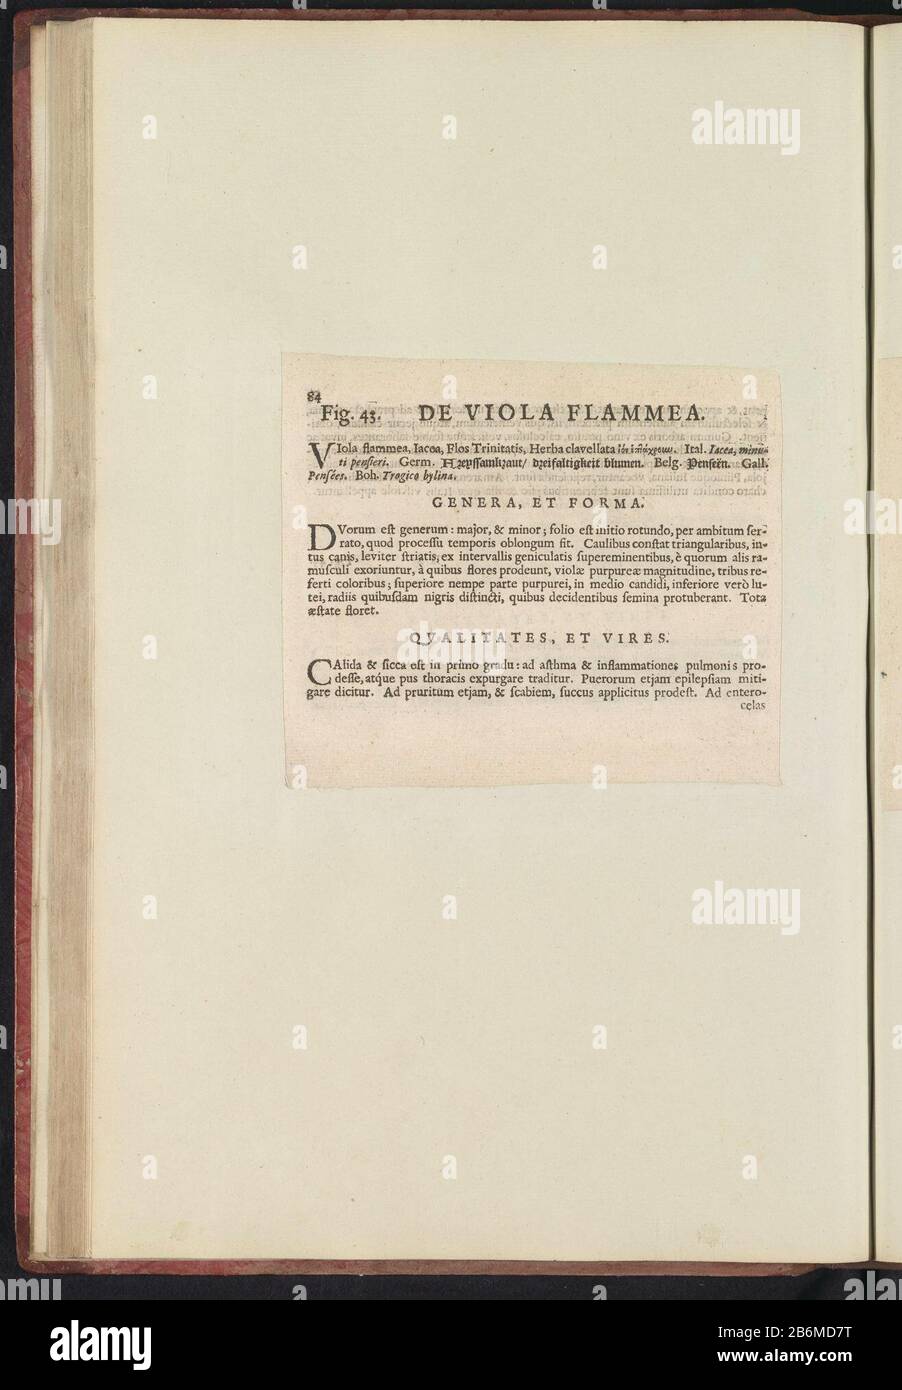 Fig 43 'De Viola Flammea' in De Boodts herbarium van 1640 Fig. 43 'The Viola flammea' in the herbarium of Boodts 1640 Object Type : Text sheet Item number: RP-T-BR-2017-1-12-49 (V) Description: Description with reference to FIG. 43 at p. 84 in: Anselmi Boëtii the Boot I.C. Brugensis & Rodolphi II. Imp. Novel. a medical cubiculis Florum, Herbarum, ac fructuum selectiorum icones, and vires pleraeque hactenus ignotæ. Part of the album with sheets and plates from the Boodts herbarium of 1640. The twelfth twelve albums of watercolors of animals, birds and plants are known around 1600, commissioned Stock Photo